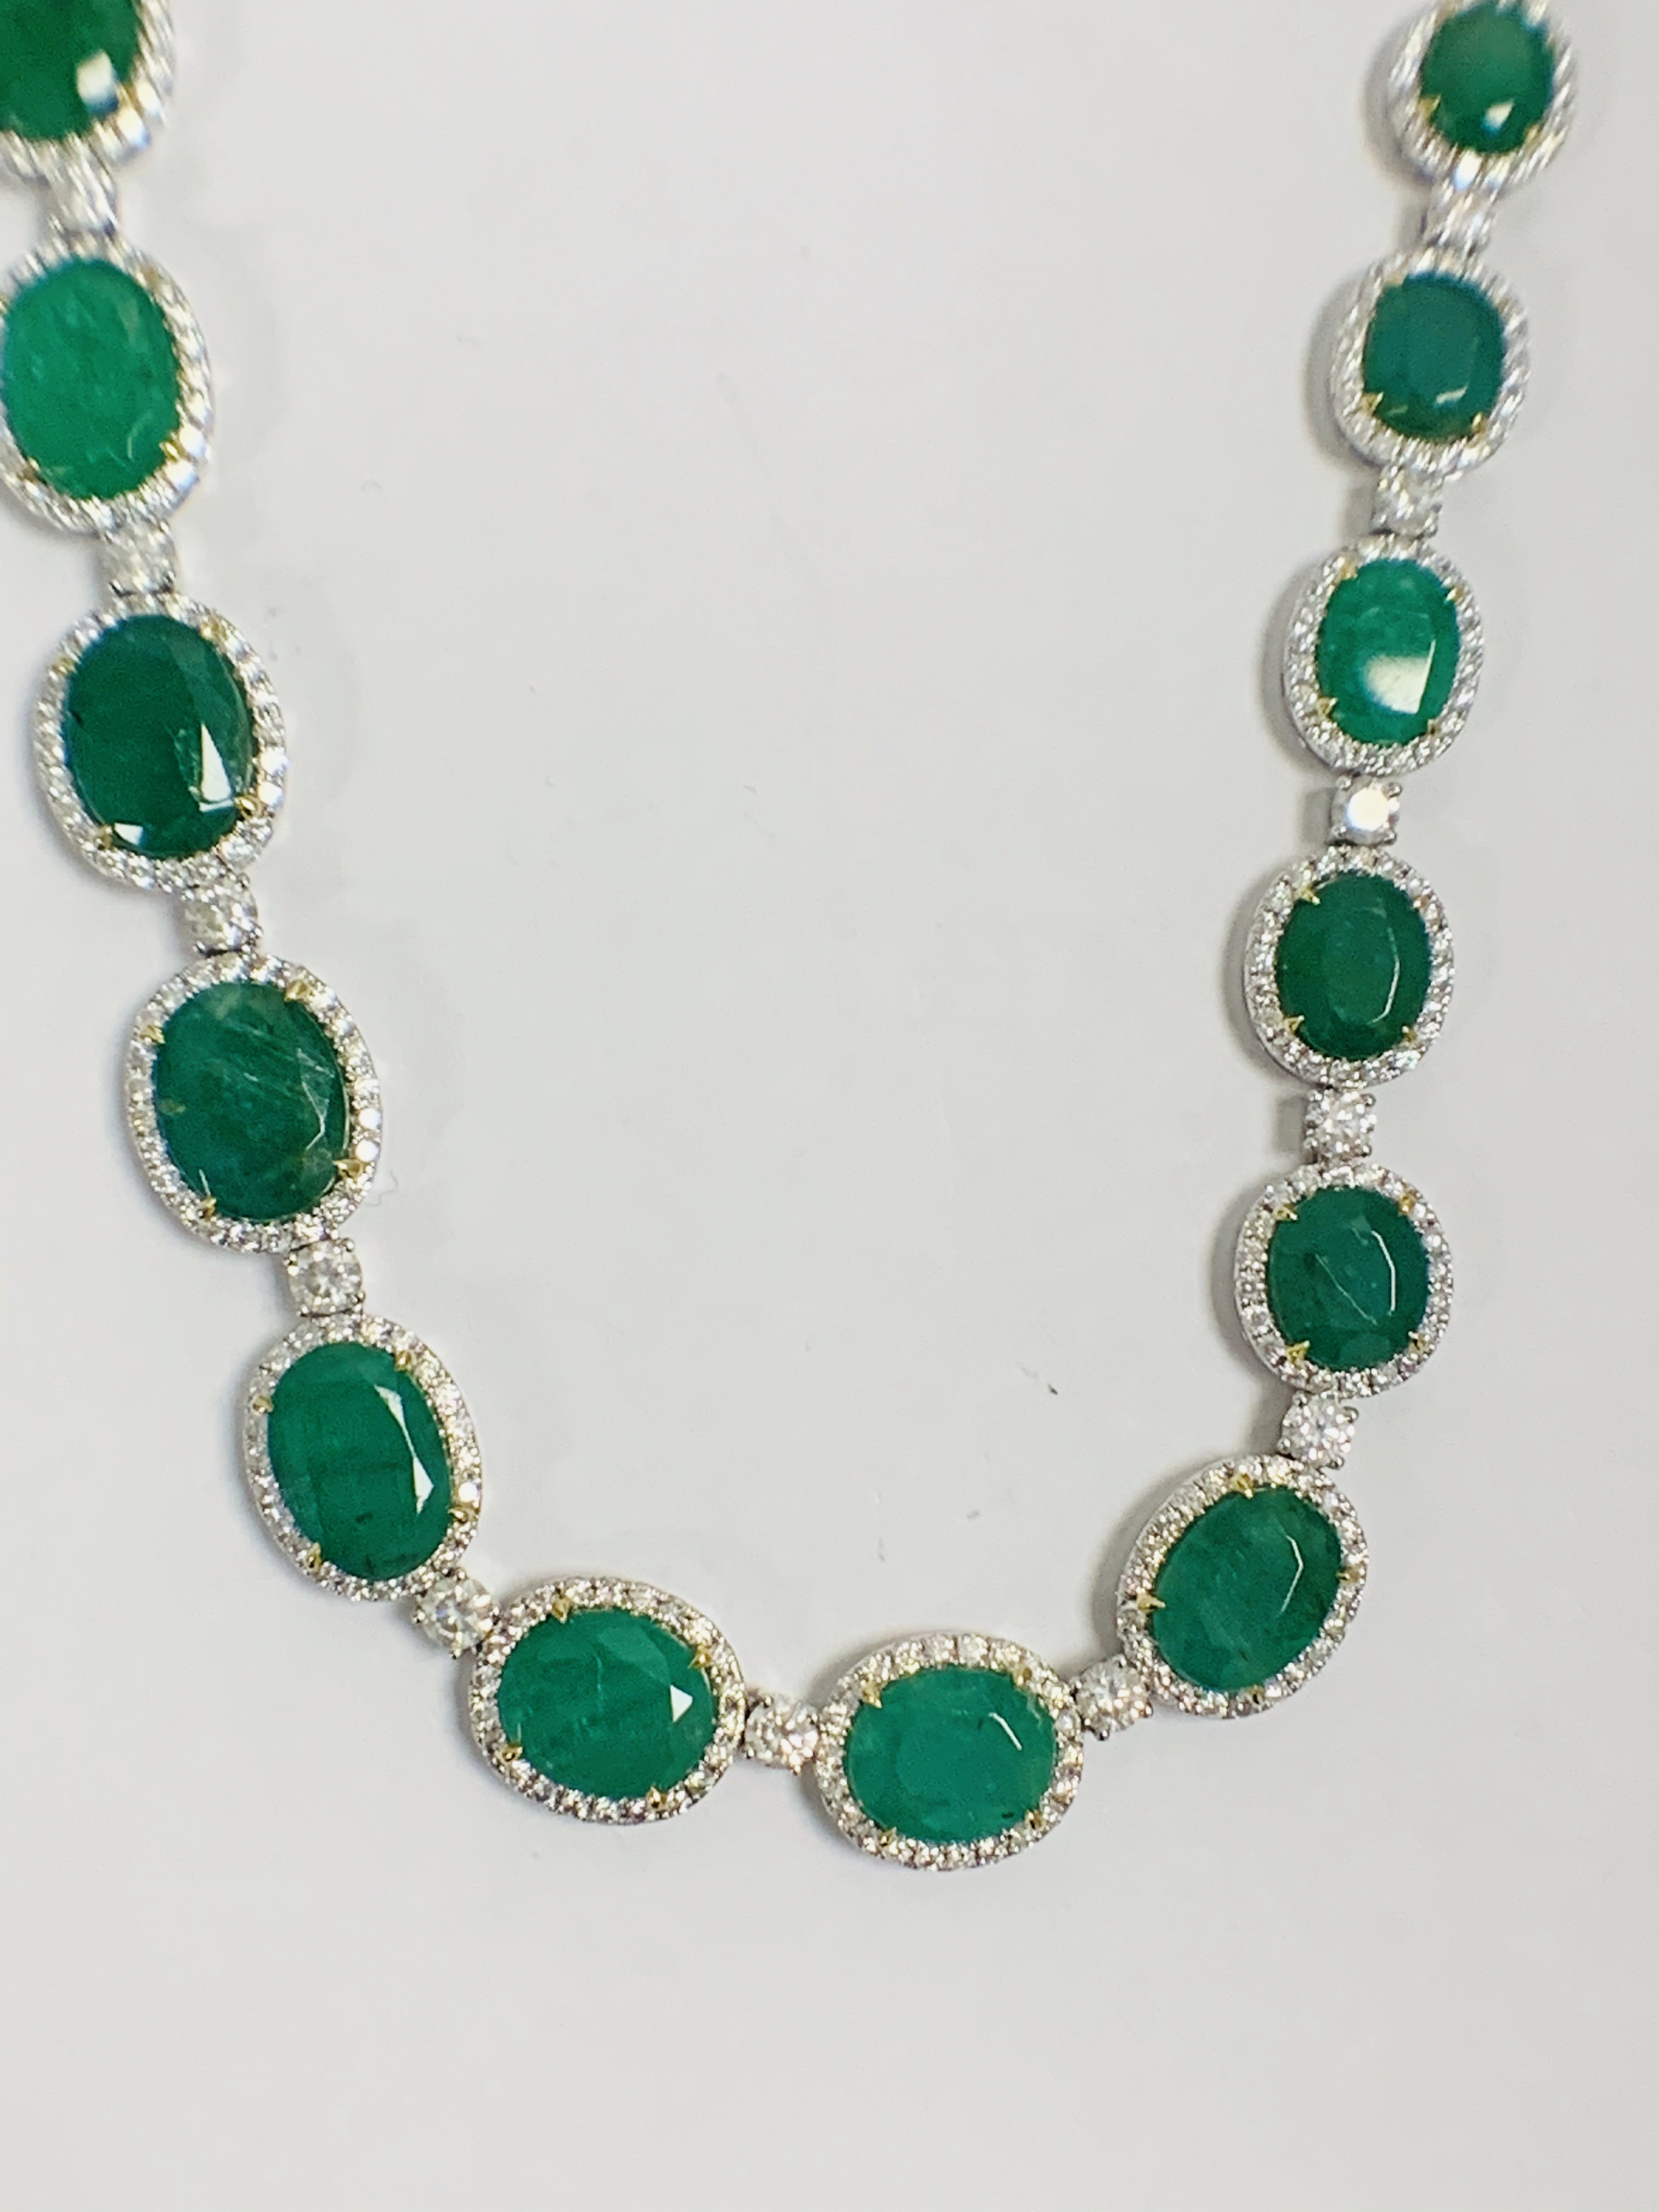 Platinum and Yellow Gold Emerald and Diamond necklace featuring, 29 oval cut, light to deep green Em - Image 2 of 36